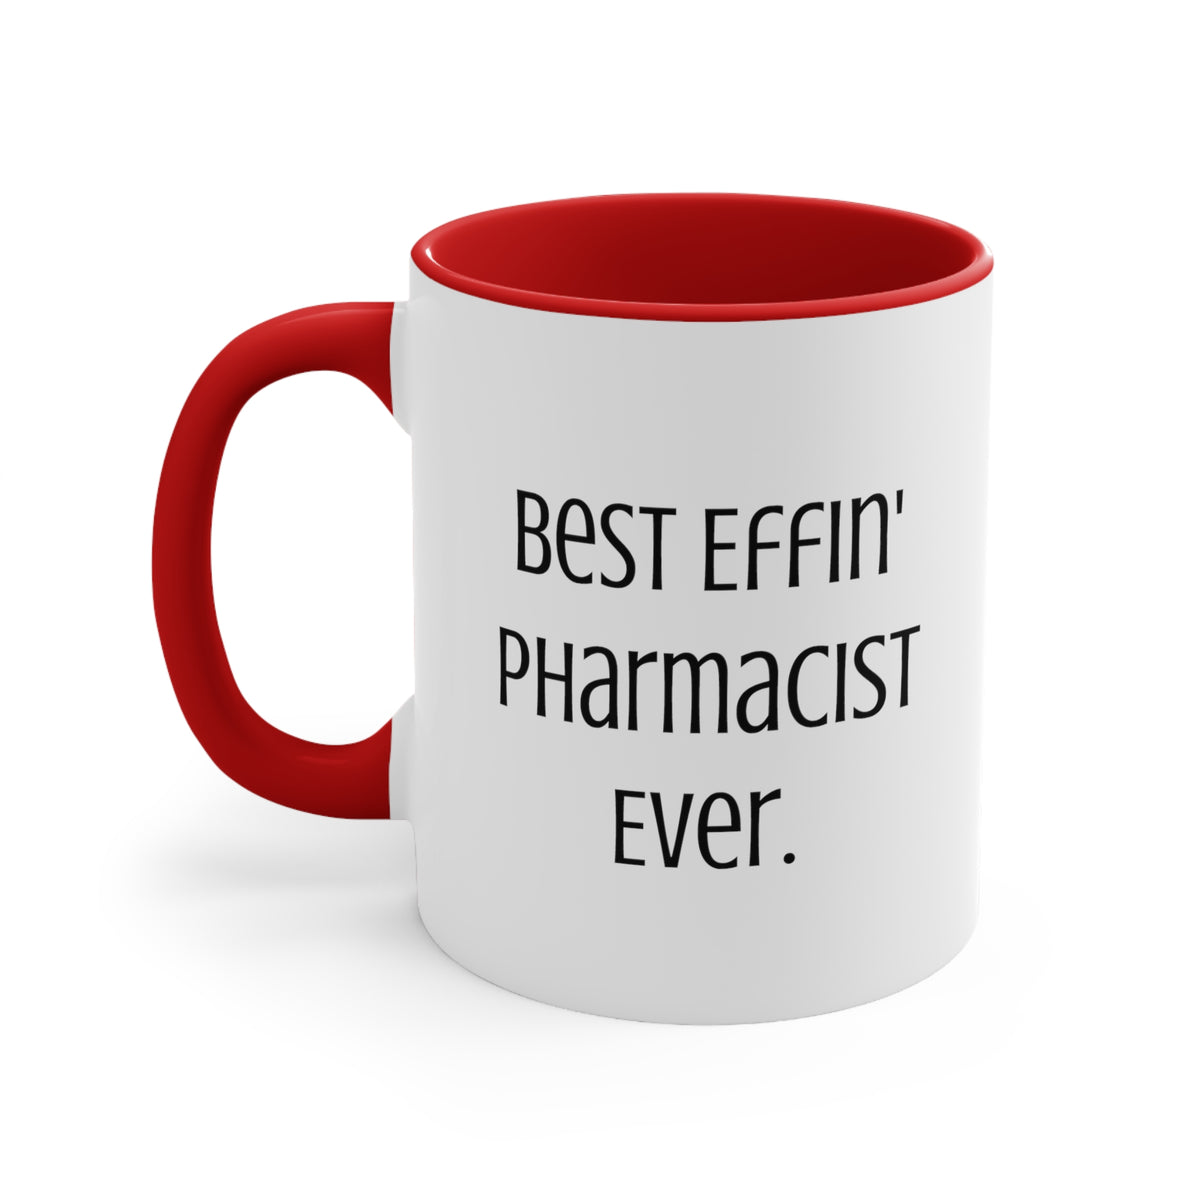 Best Effin' Pharmacist Ever. Two Tone 11oz Mug, Pharmacist Cup, Fun Gifts For Pharmacist from Colleagues, Pharmacist gifts, Gifts for pharmacists, Cool pharmacist gifts